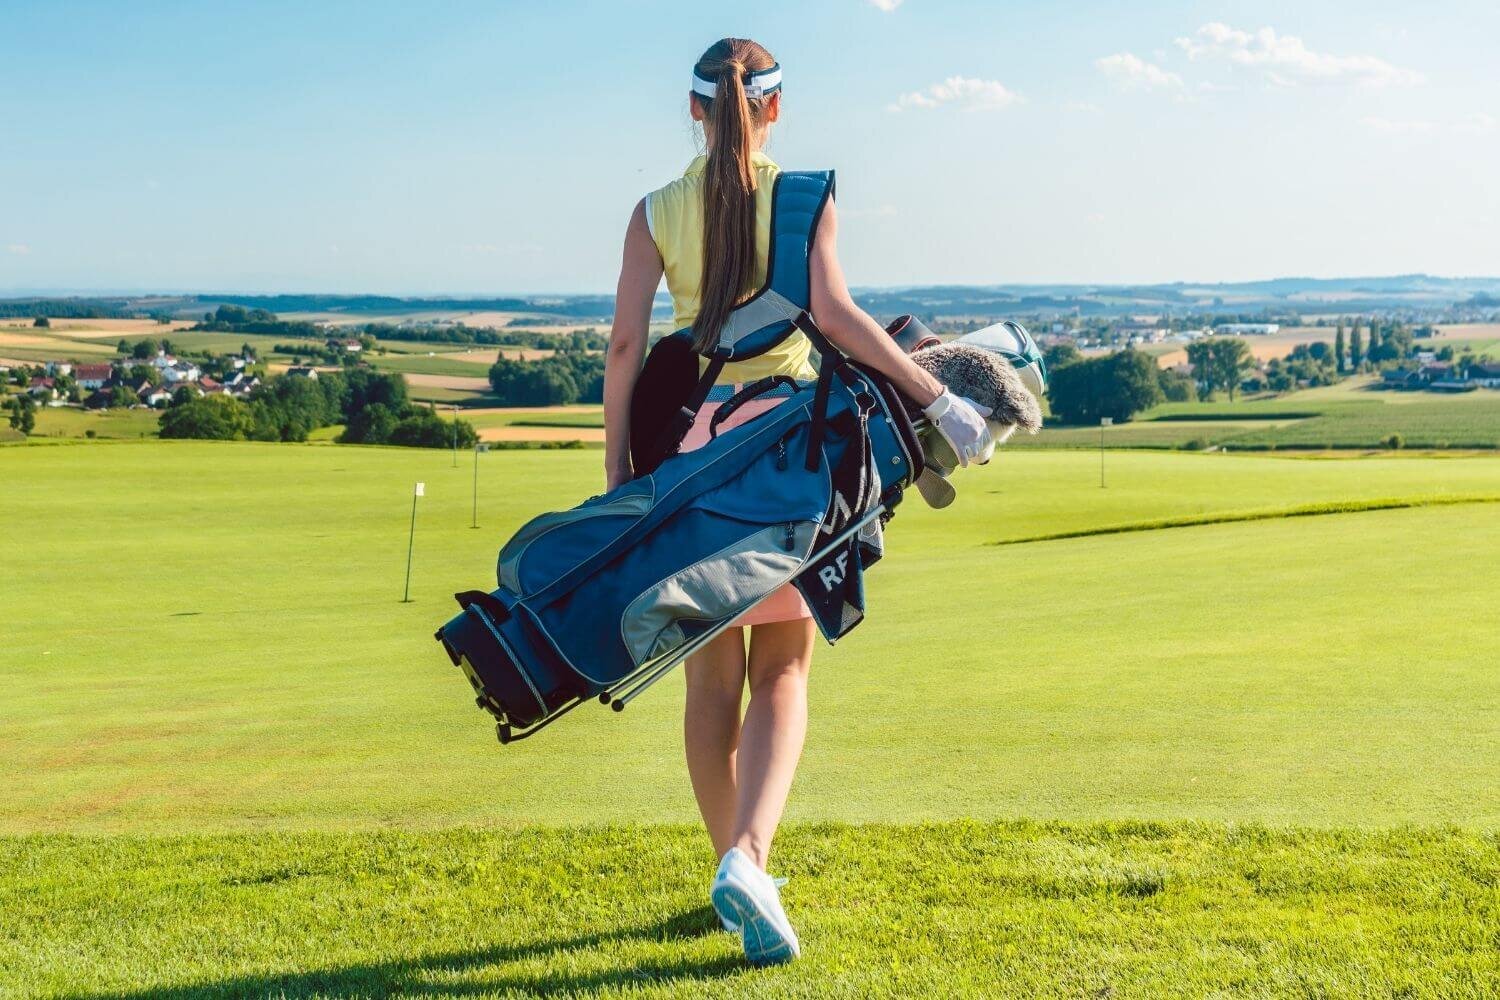 Woman golfer from behind dressed in golf attire carrying golf bag onto golf course